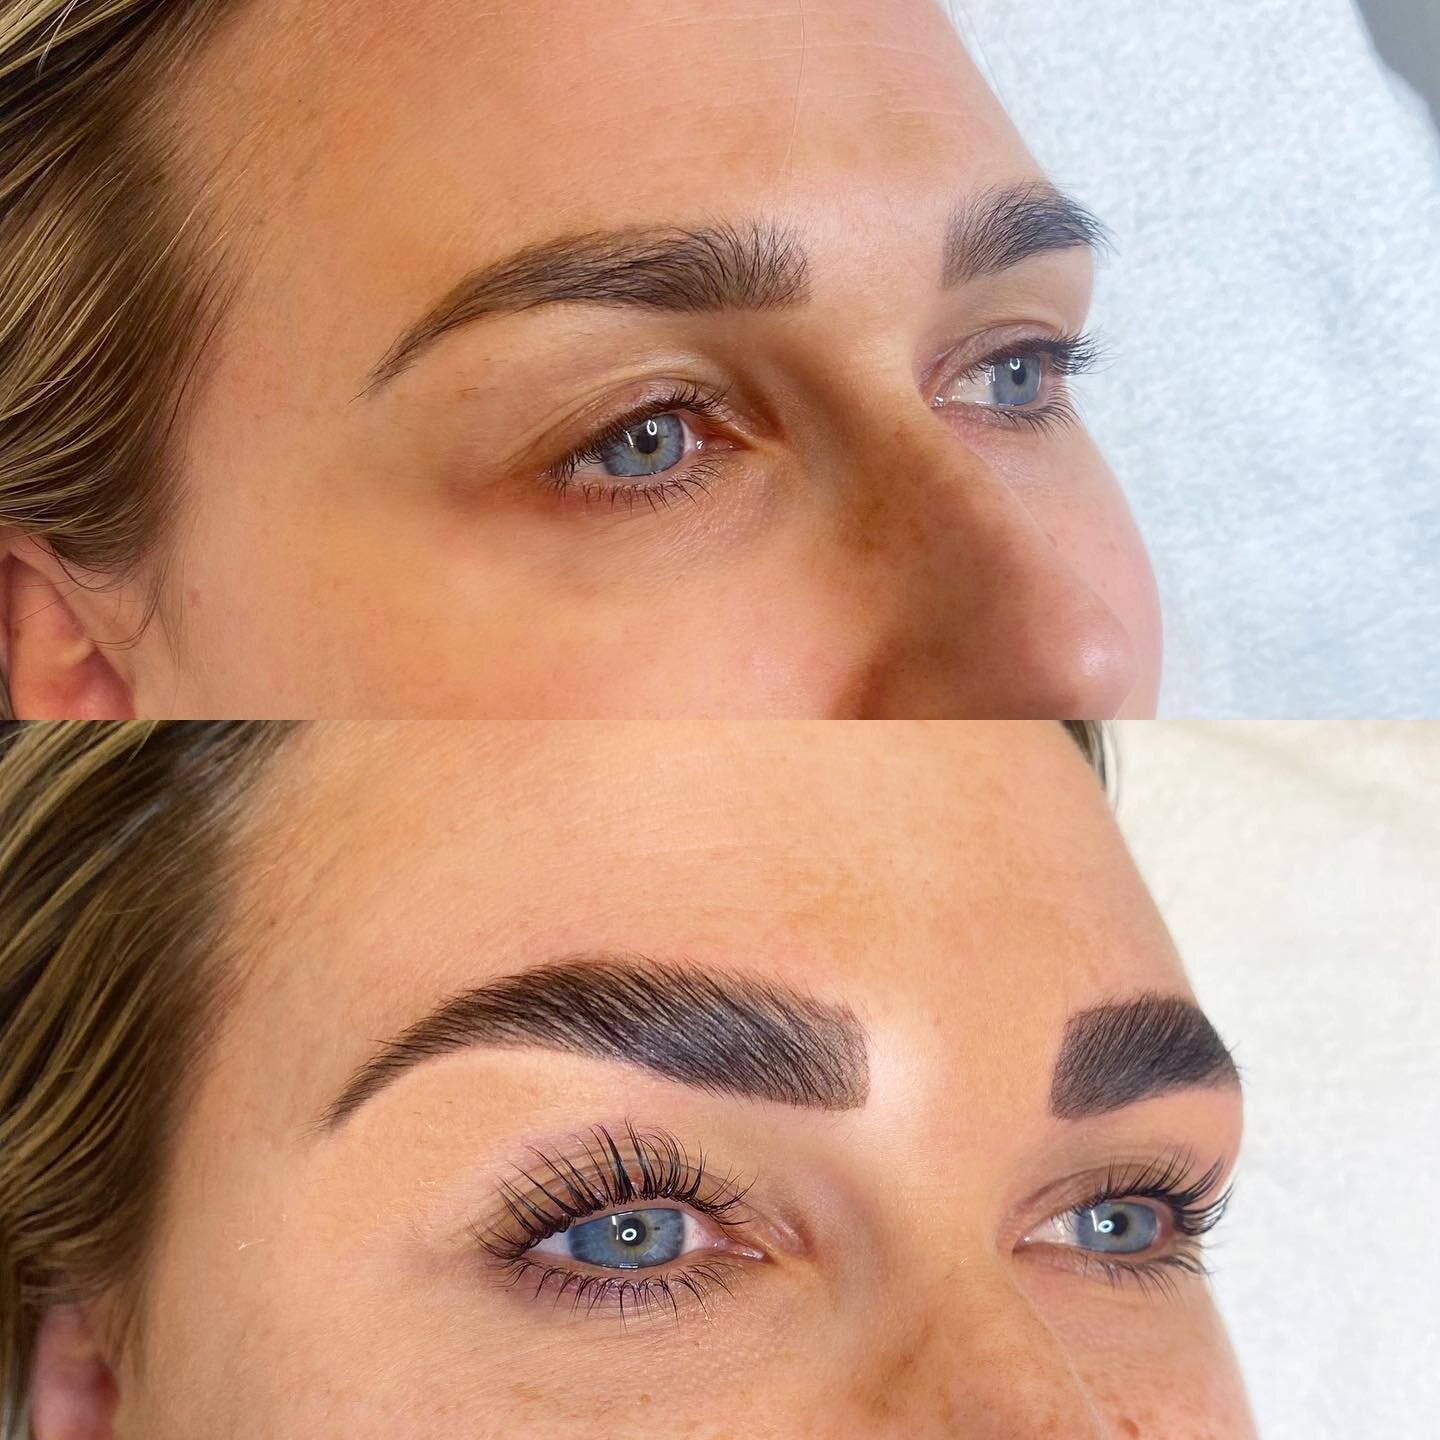 Check out this Eyelash Lift and Tint with Eyebrow Lamination and Tint 💕

We are now offering Eyebrow Lamination to give you that extra wow factor 🤩 Way to make a tired mama feel refreshed 

👉🏼Book your Appointment online now via our social media 